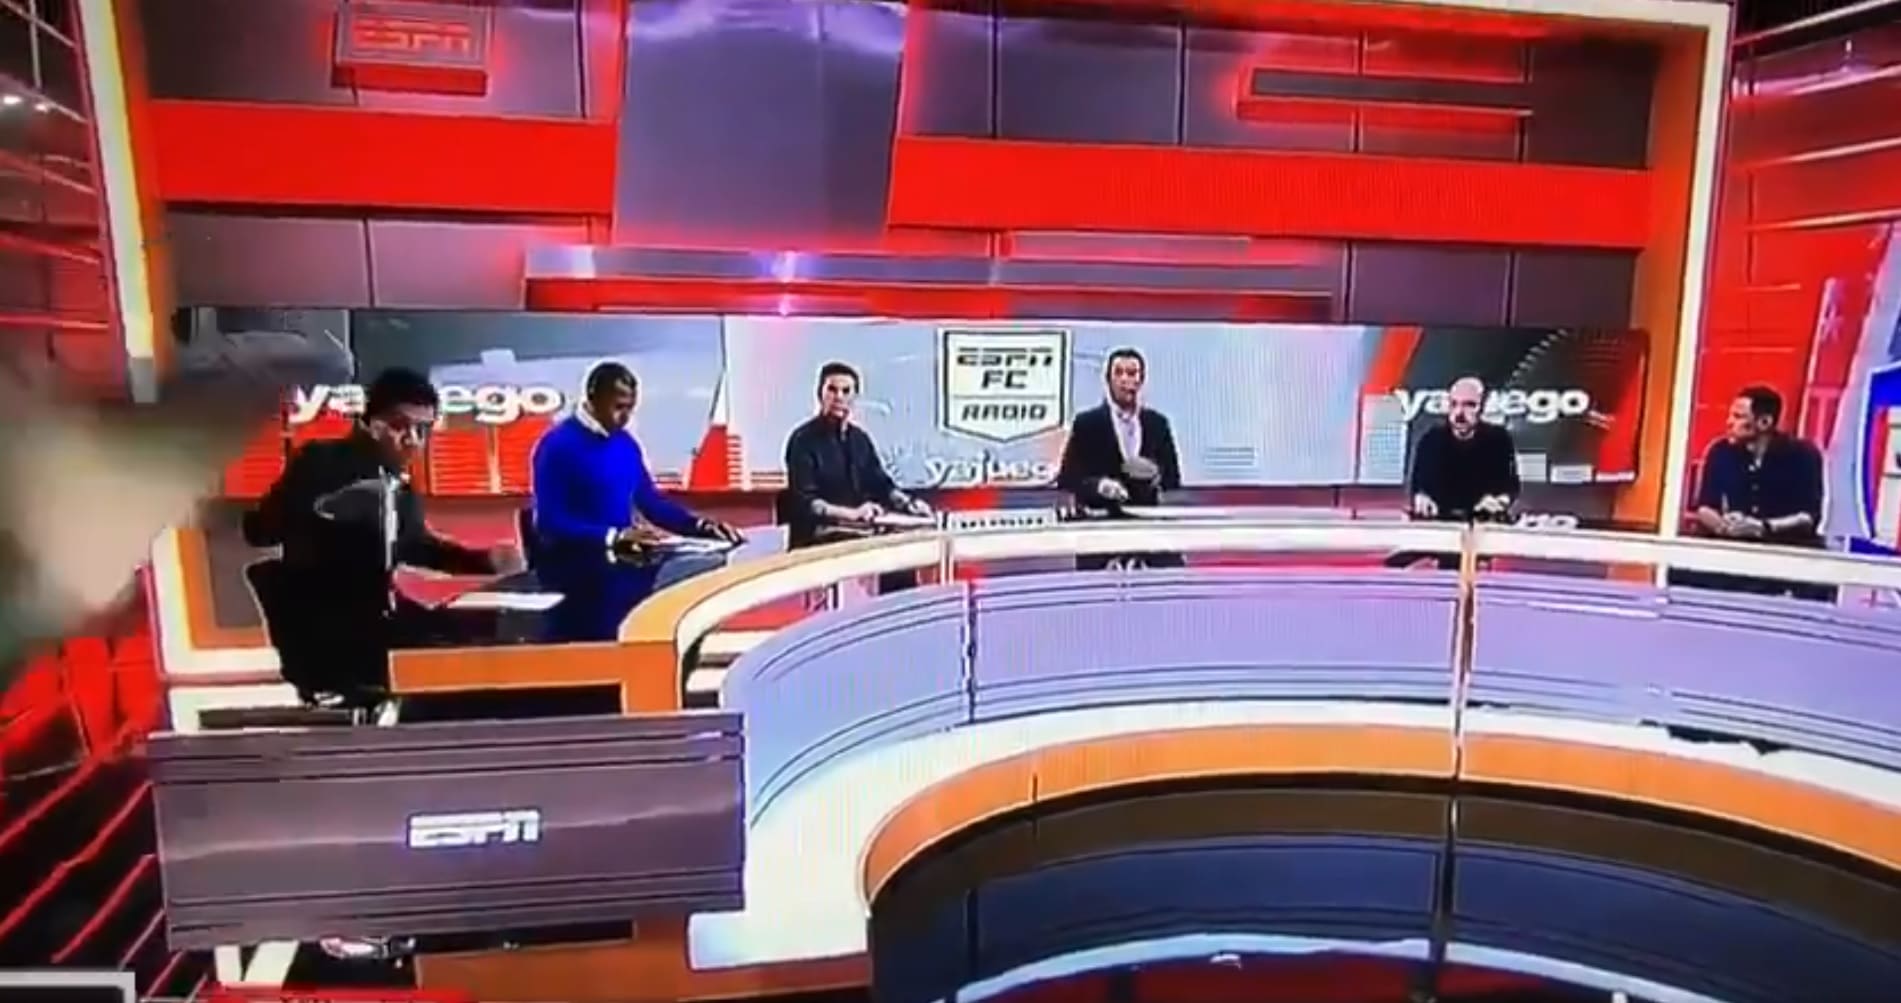 ESPN Colombia Personality Somehow Completely Fine After TV Monitor Falls on Him